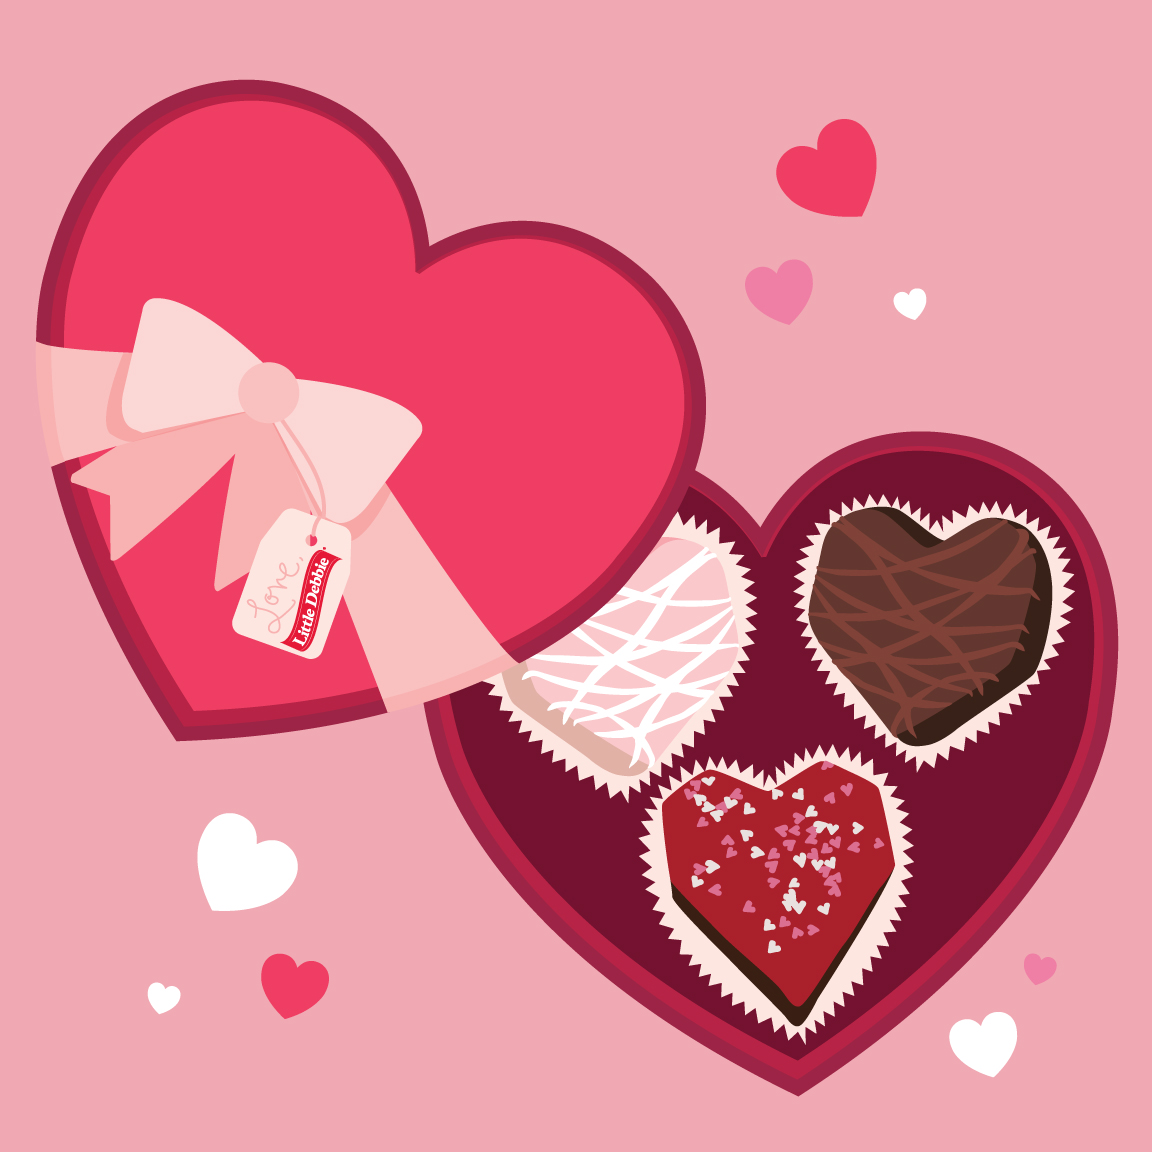 Share a treat that we've Baked with Love today! Happy Valentine's Day! #LittleDebbie #unwrapasmile #todaywebake